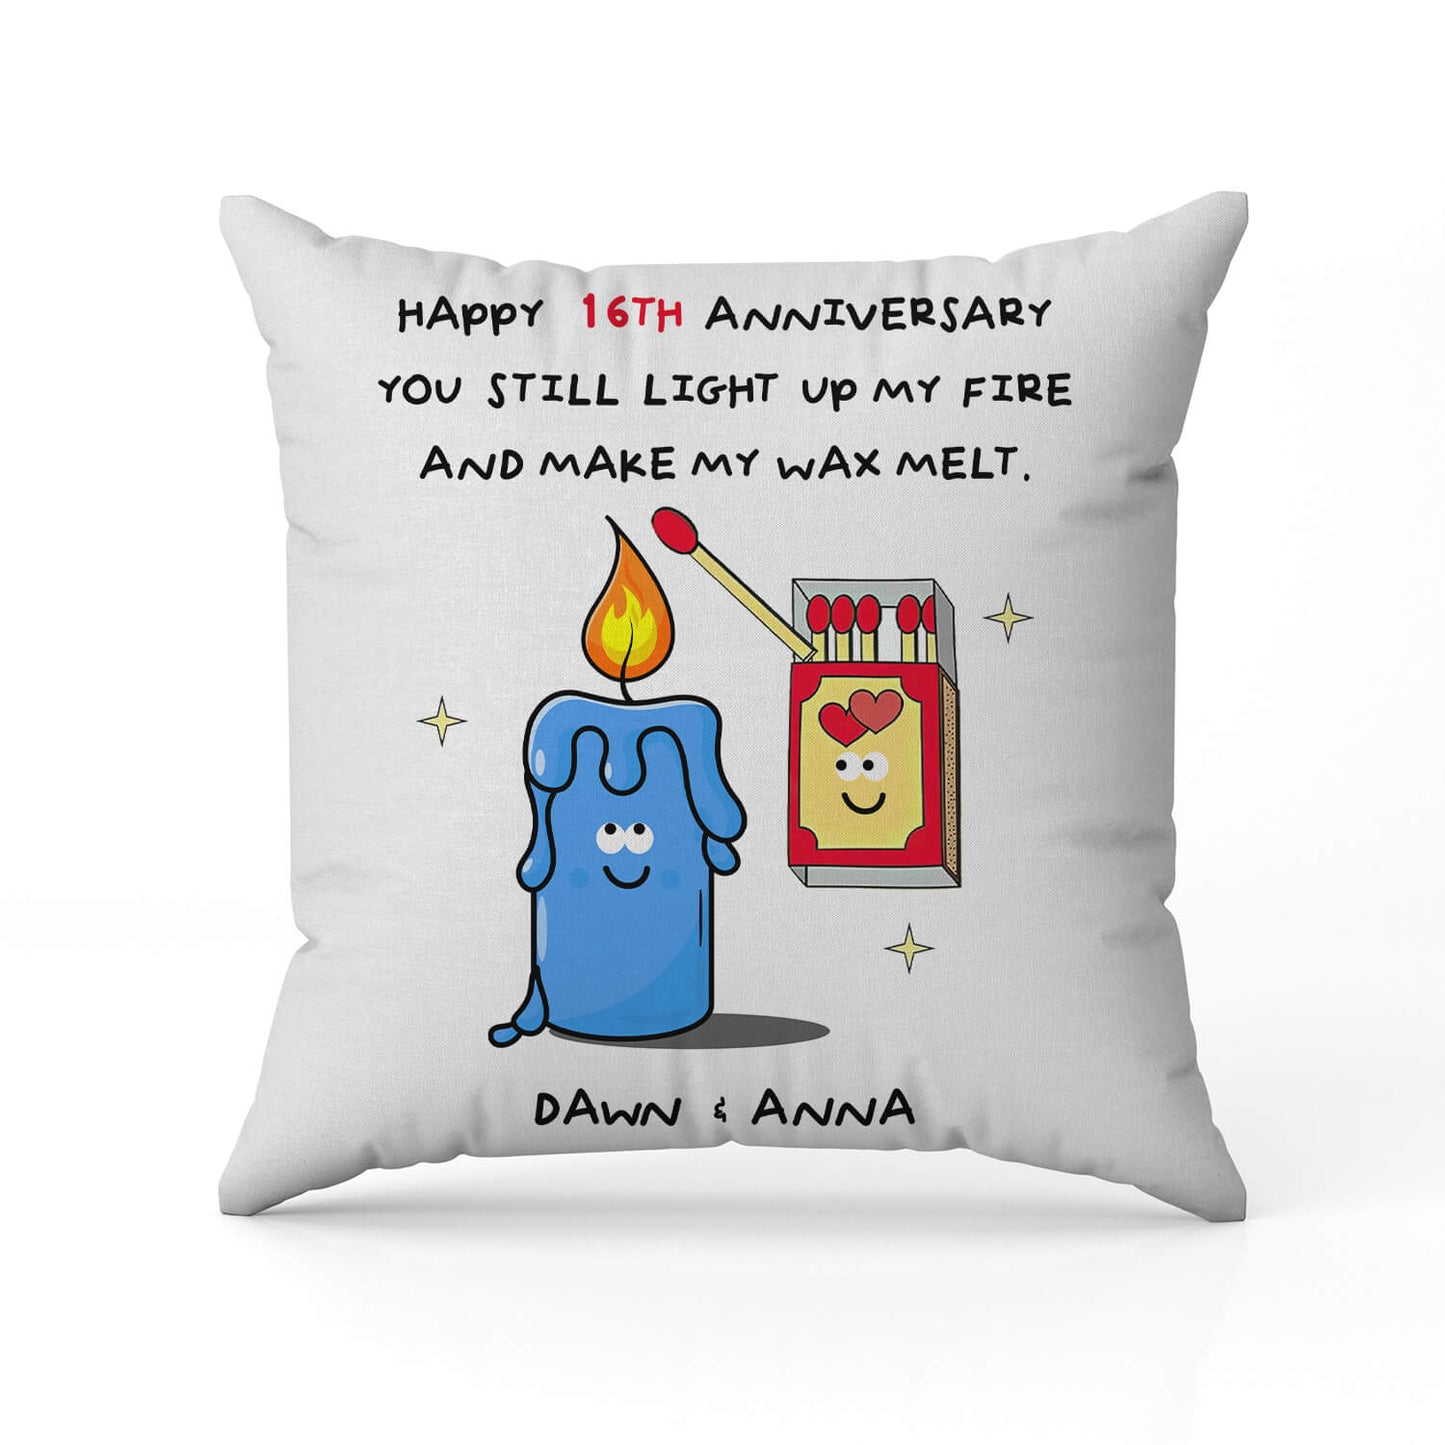 Make My Wax Melt - Personalized 16 Year Anniversary gift For Husband or Wife - Custom Pillow - MyMindfulGifts